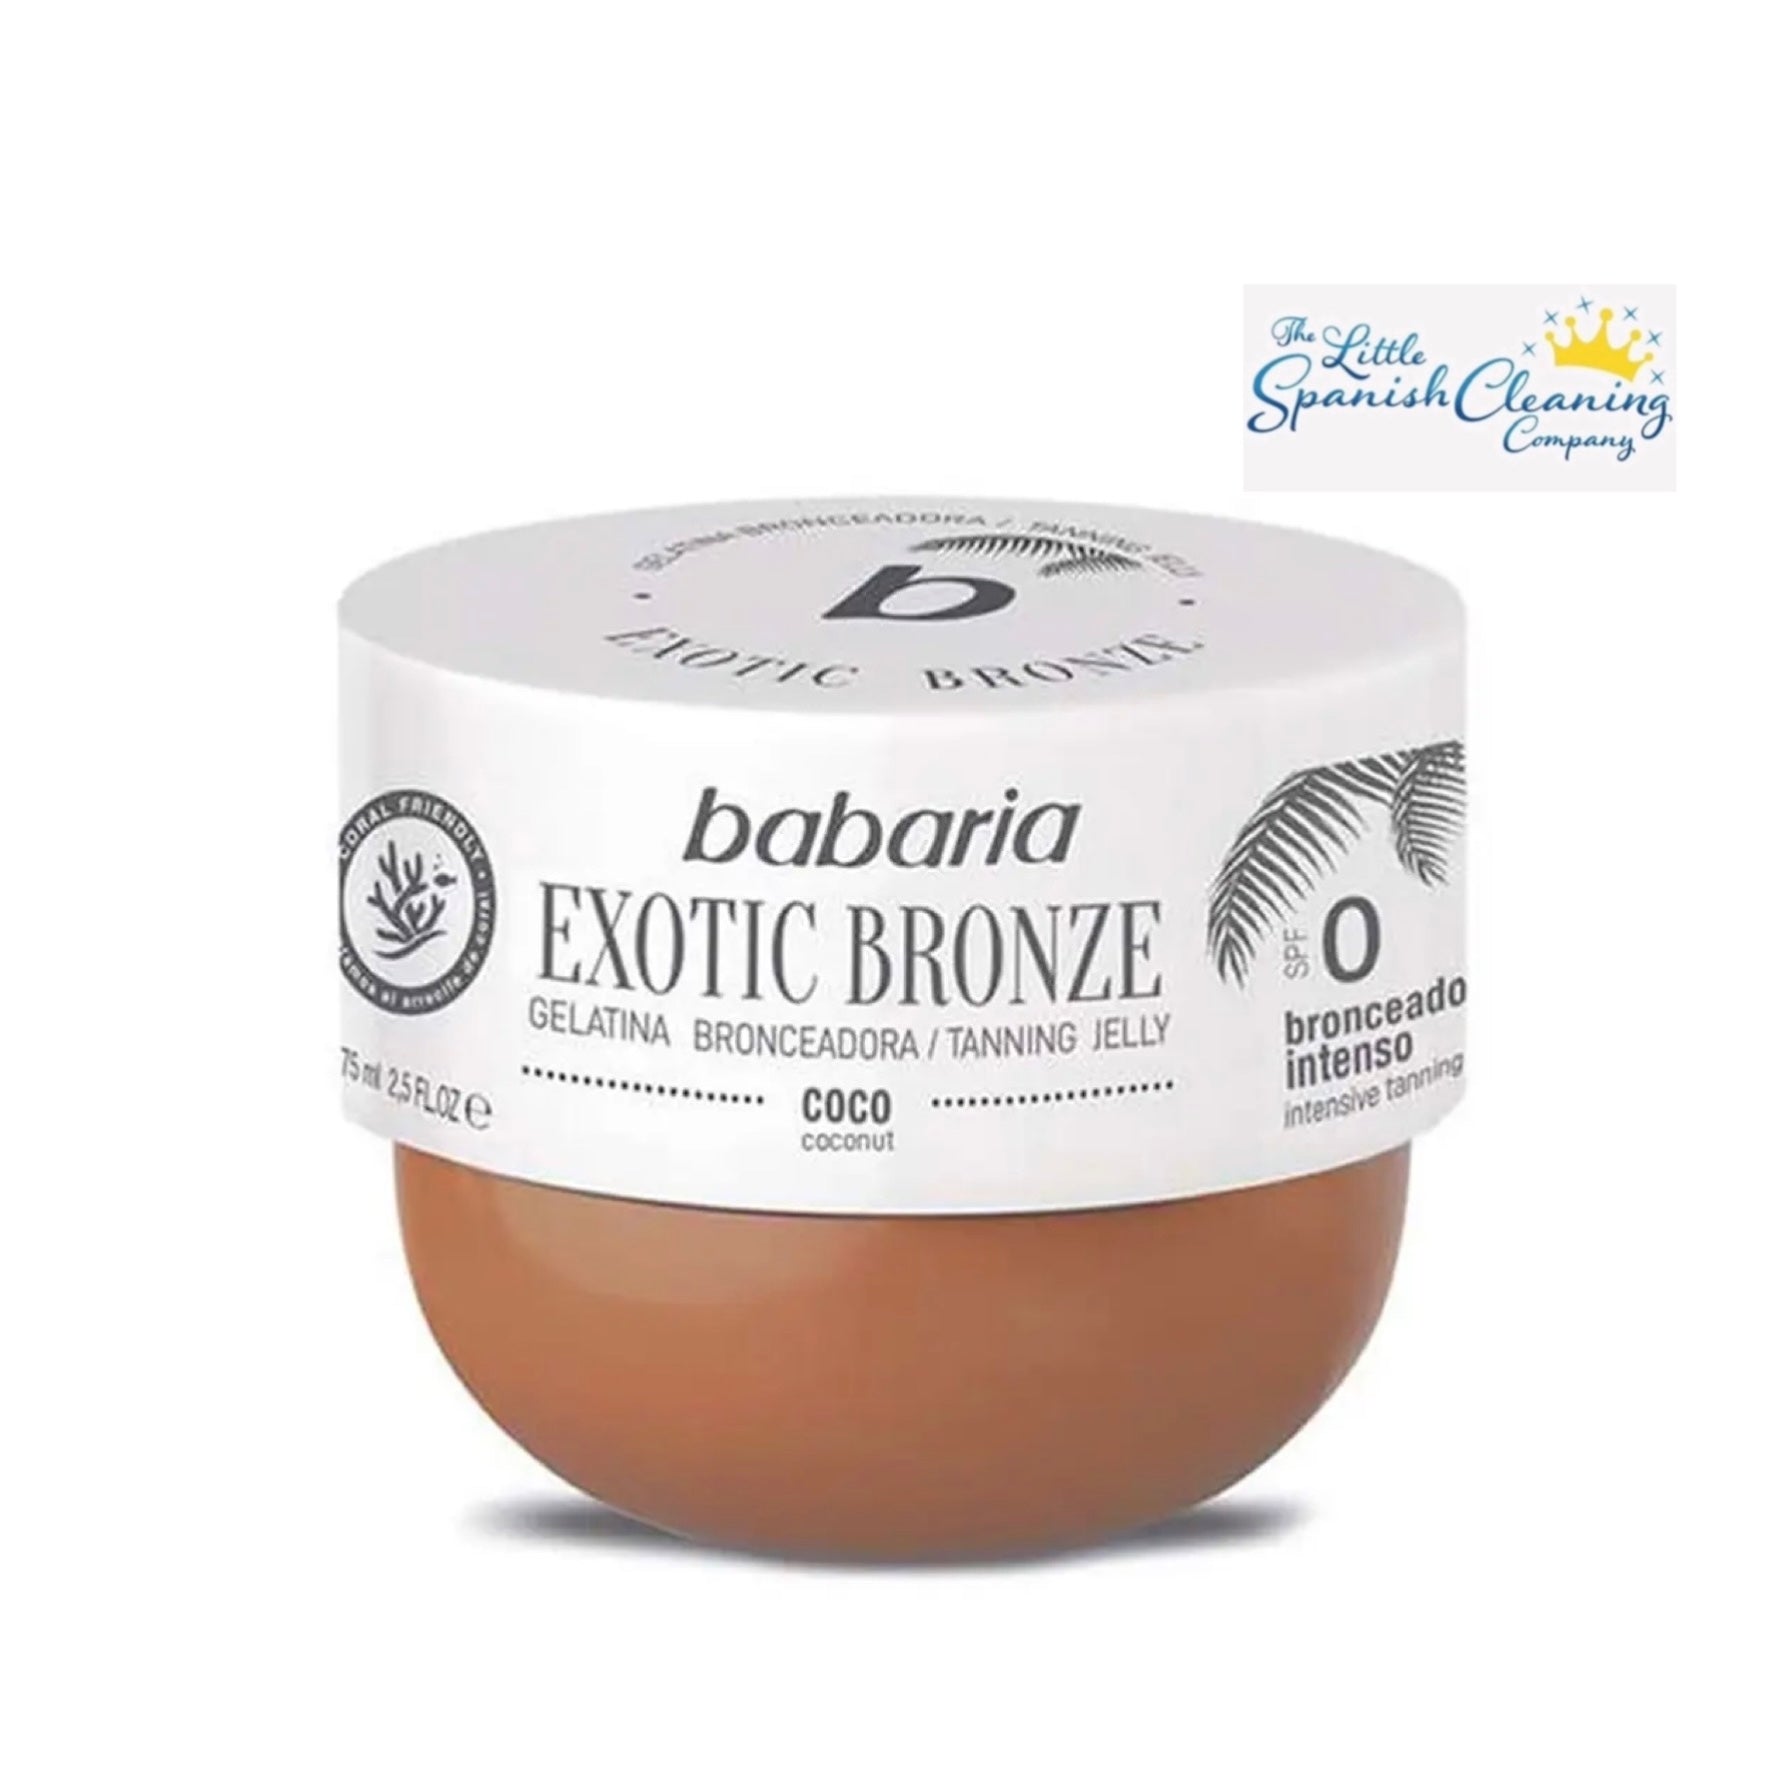 Babaria Exotic Bronze Tanning Jelly Coconut Fragrance